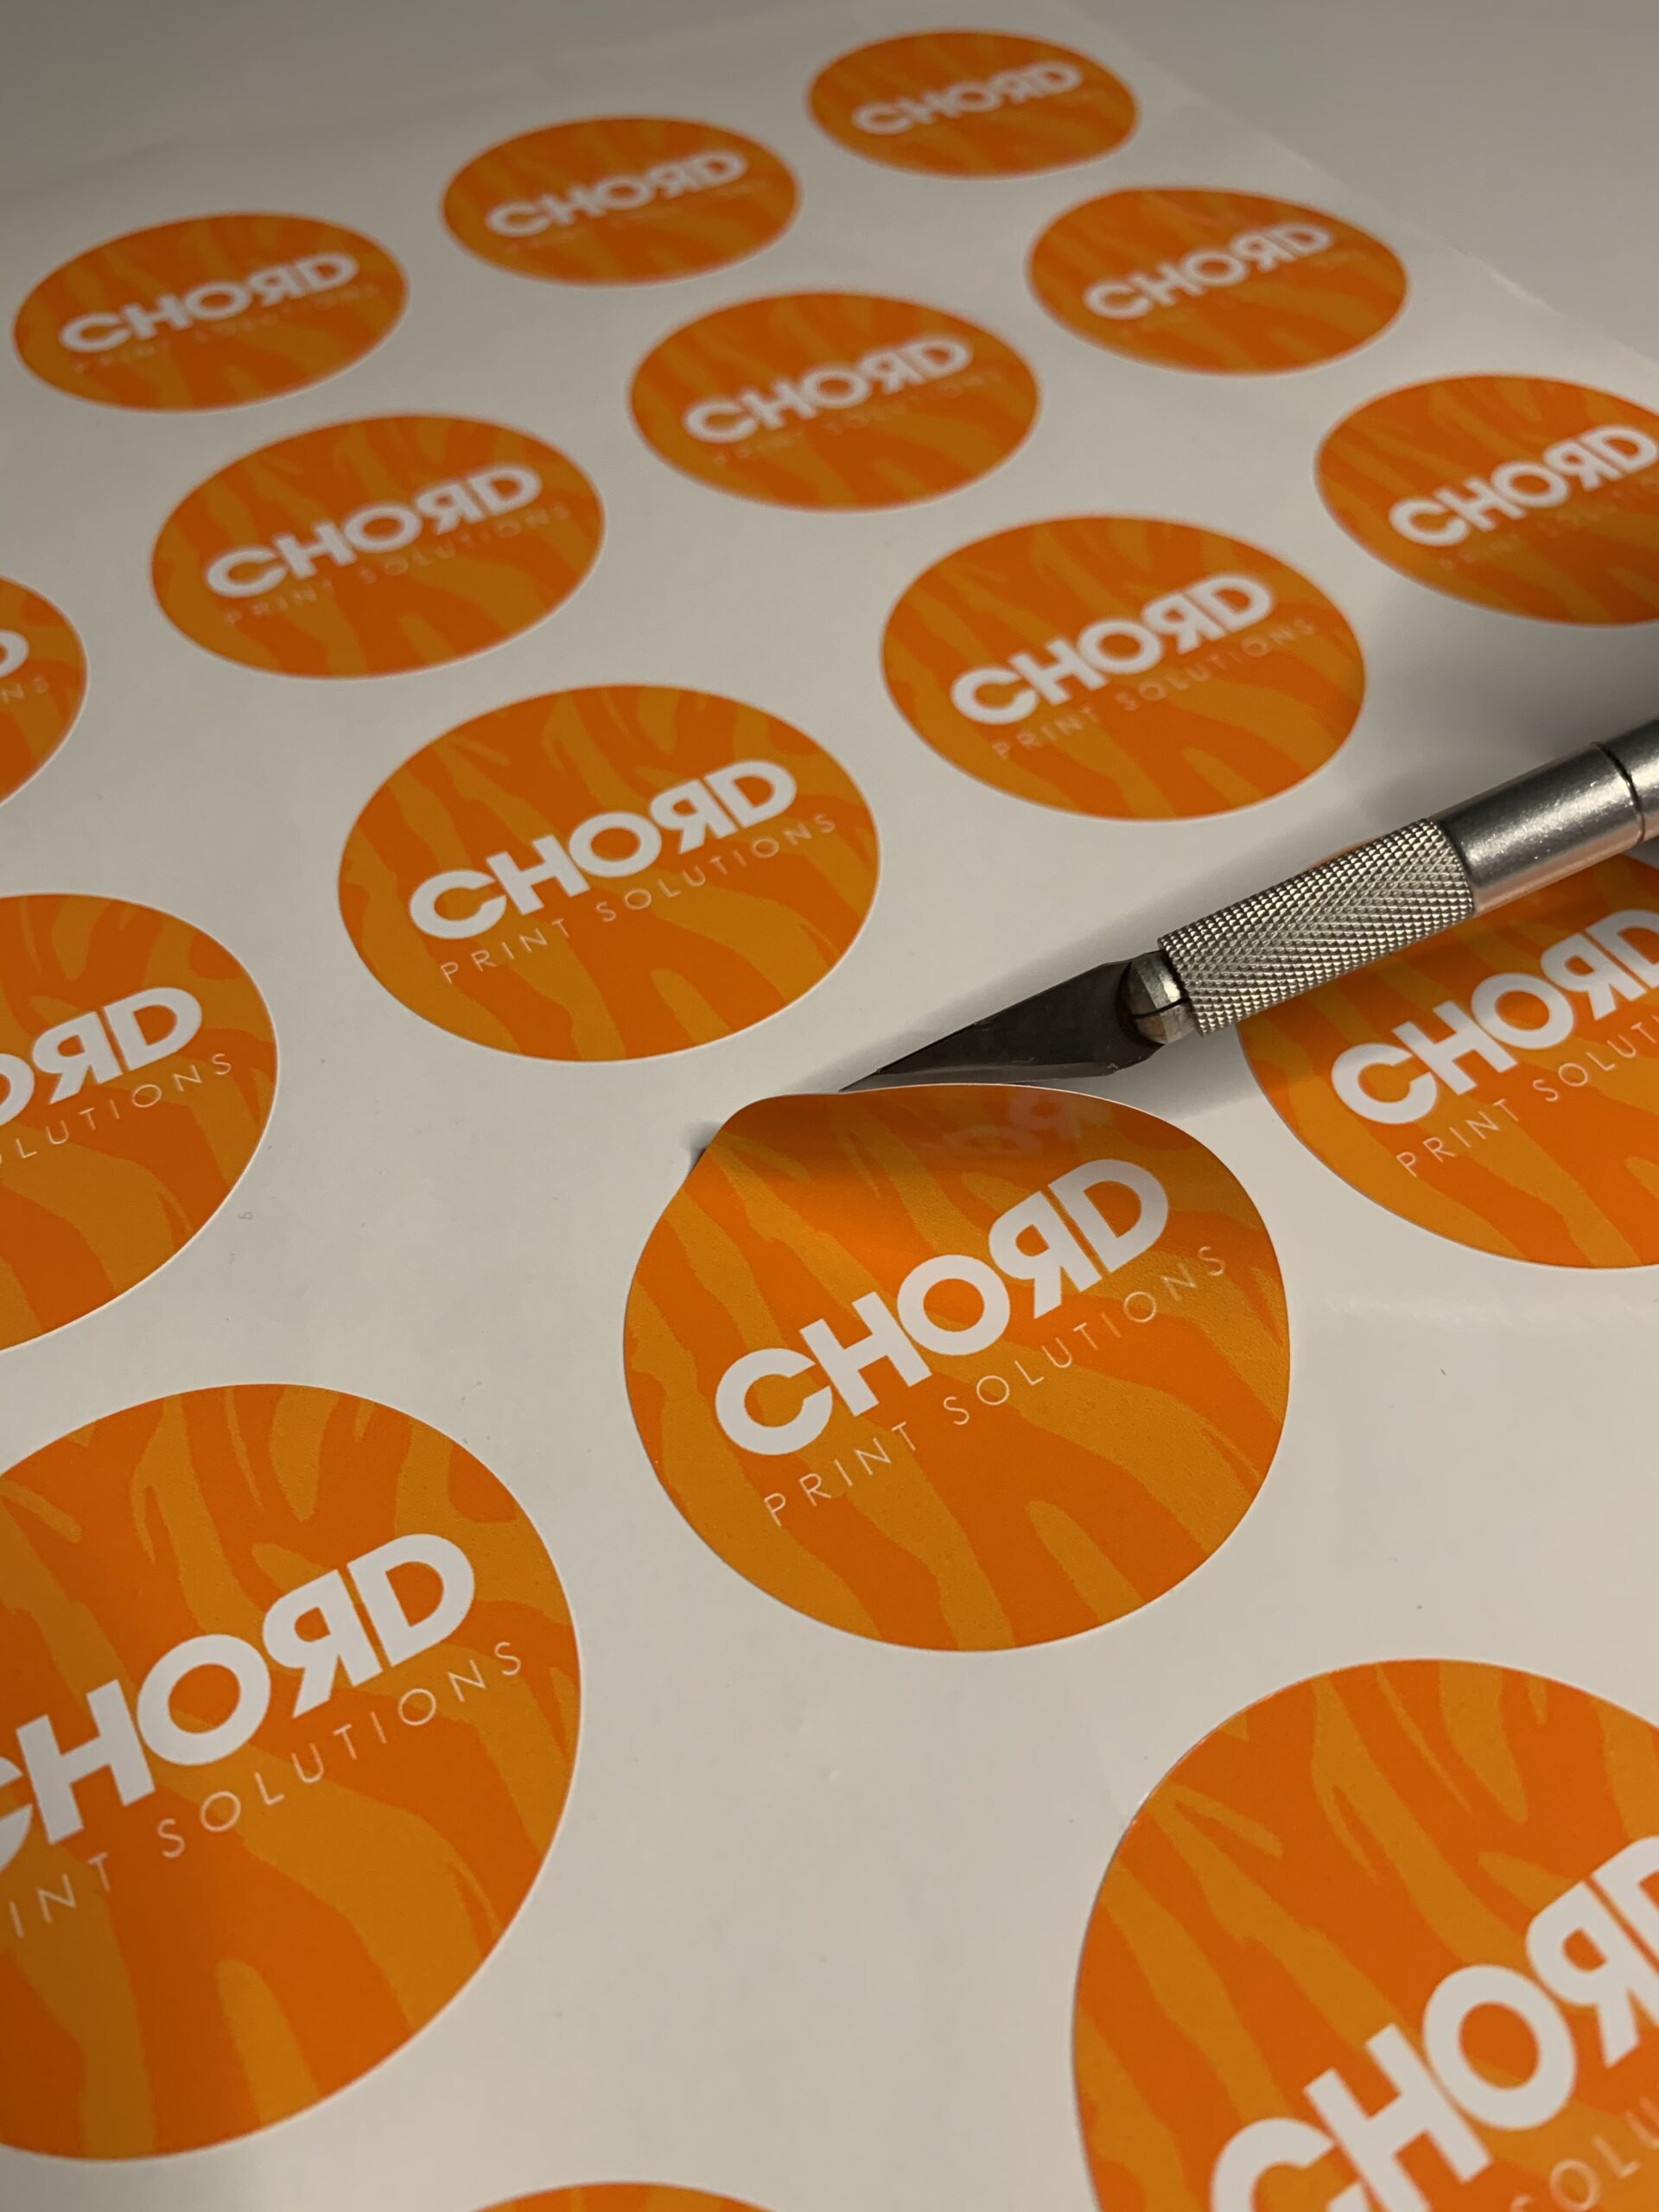 Chord Print Solutions in Southport produces banners, signs, flyers, business cards, stickers, packaging and Covid-19 safety screens and signage